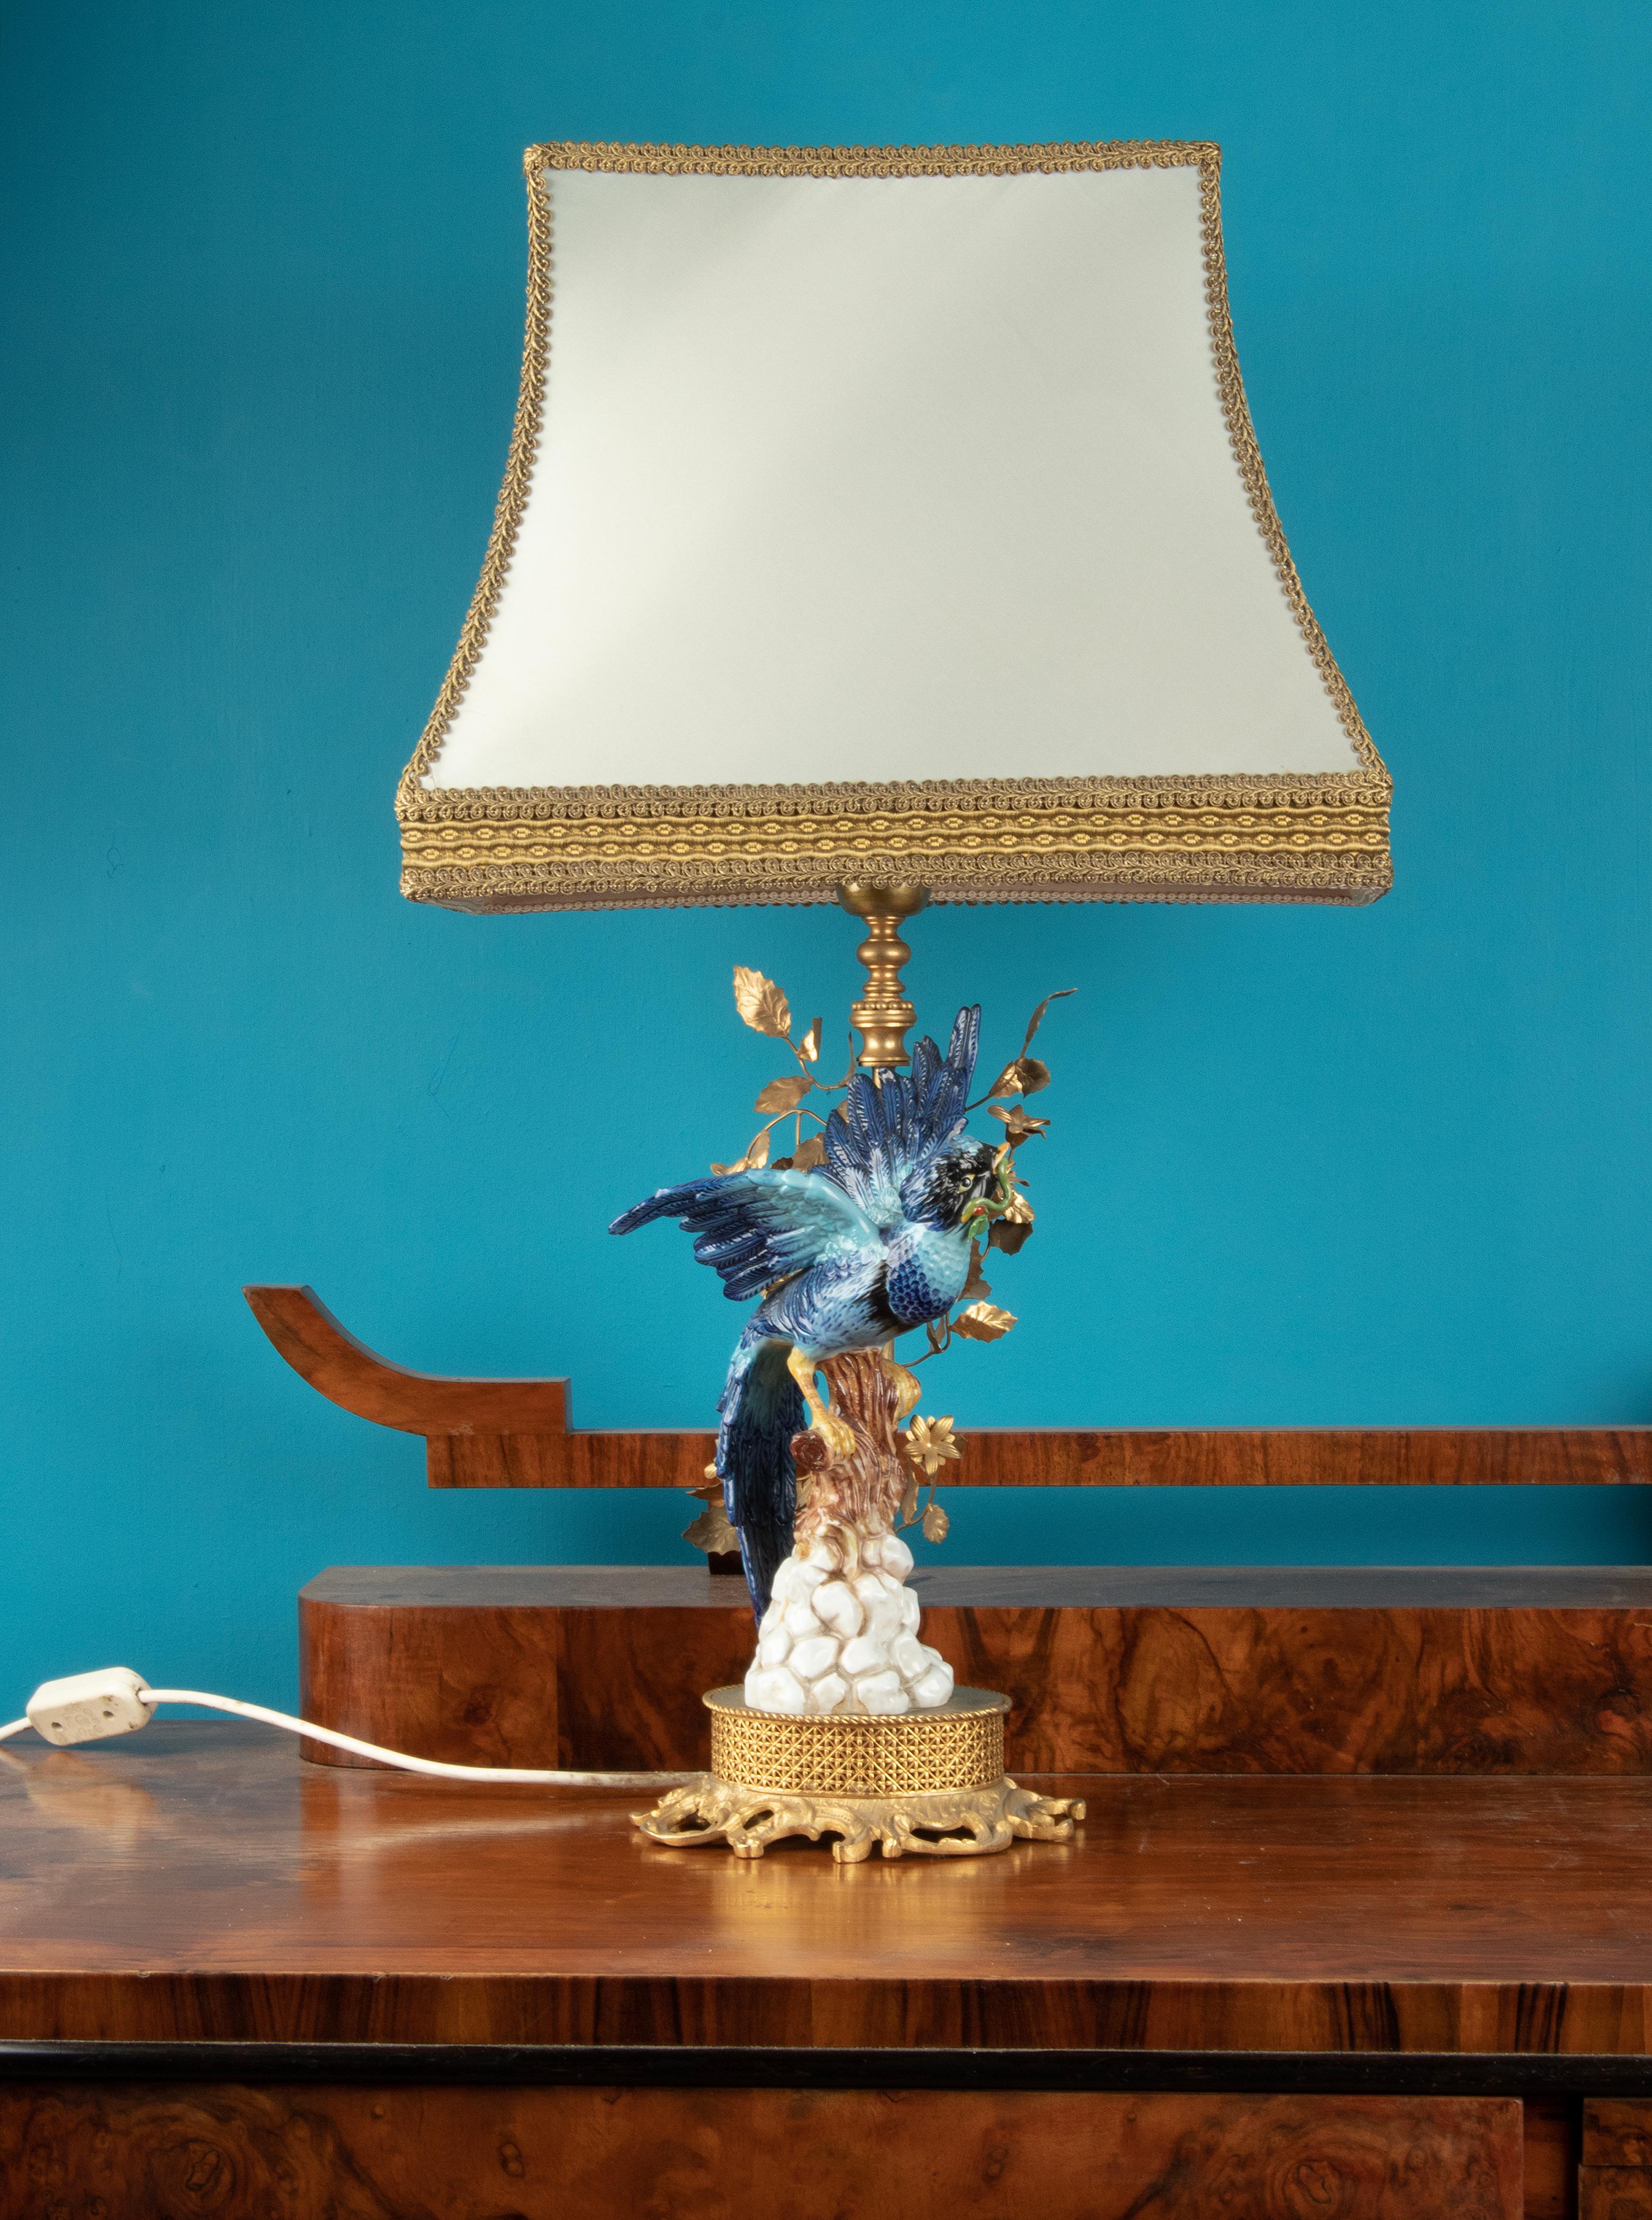 Nice Vintage table lamp, with a figurine of a blue parrot, made of porcelain. The lamp foot is made of bronze and leafs are made of copper. The porcelain is marked Sèvres. The lamp shade is made of silk fabric, and has some small stains in the